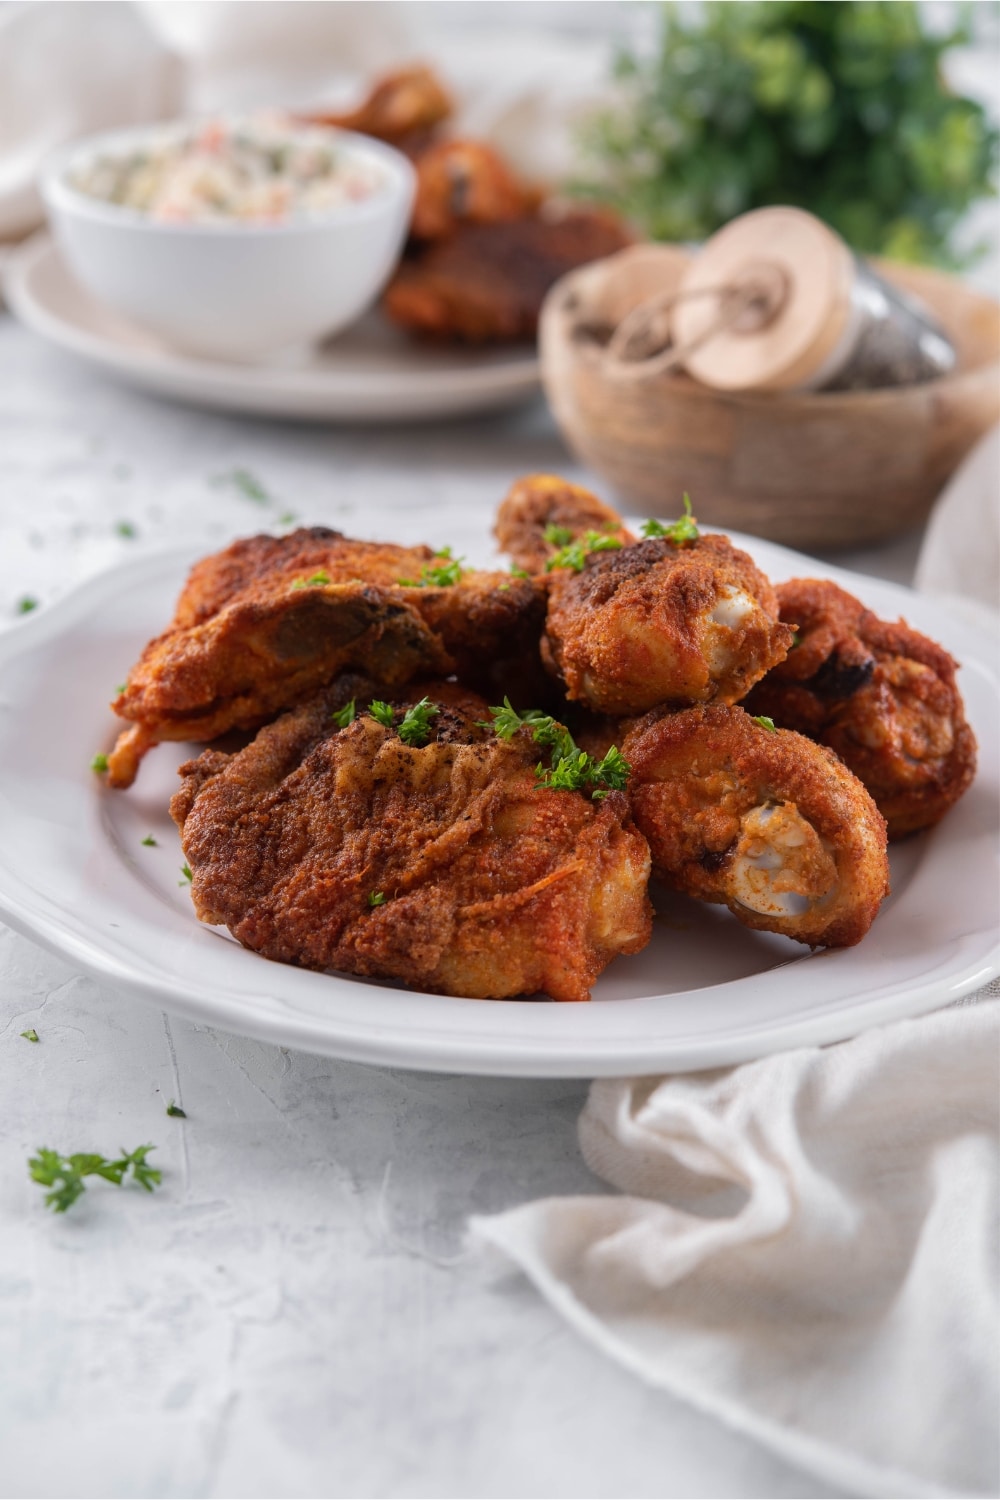 A plate of baked chicken legs and thighs. In the back is another plate of chicken legs and thighs served with a creamy salad.